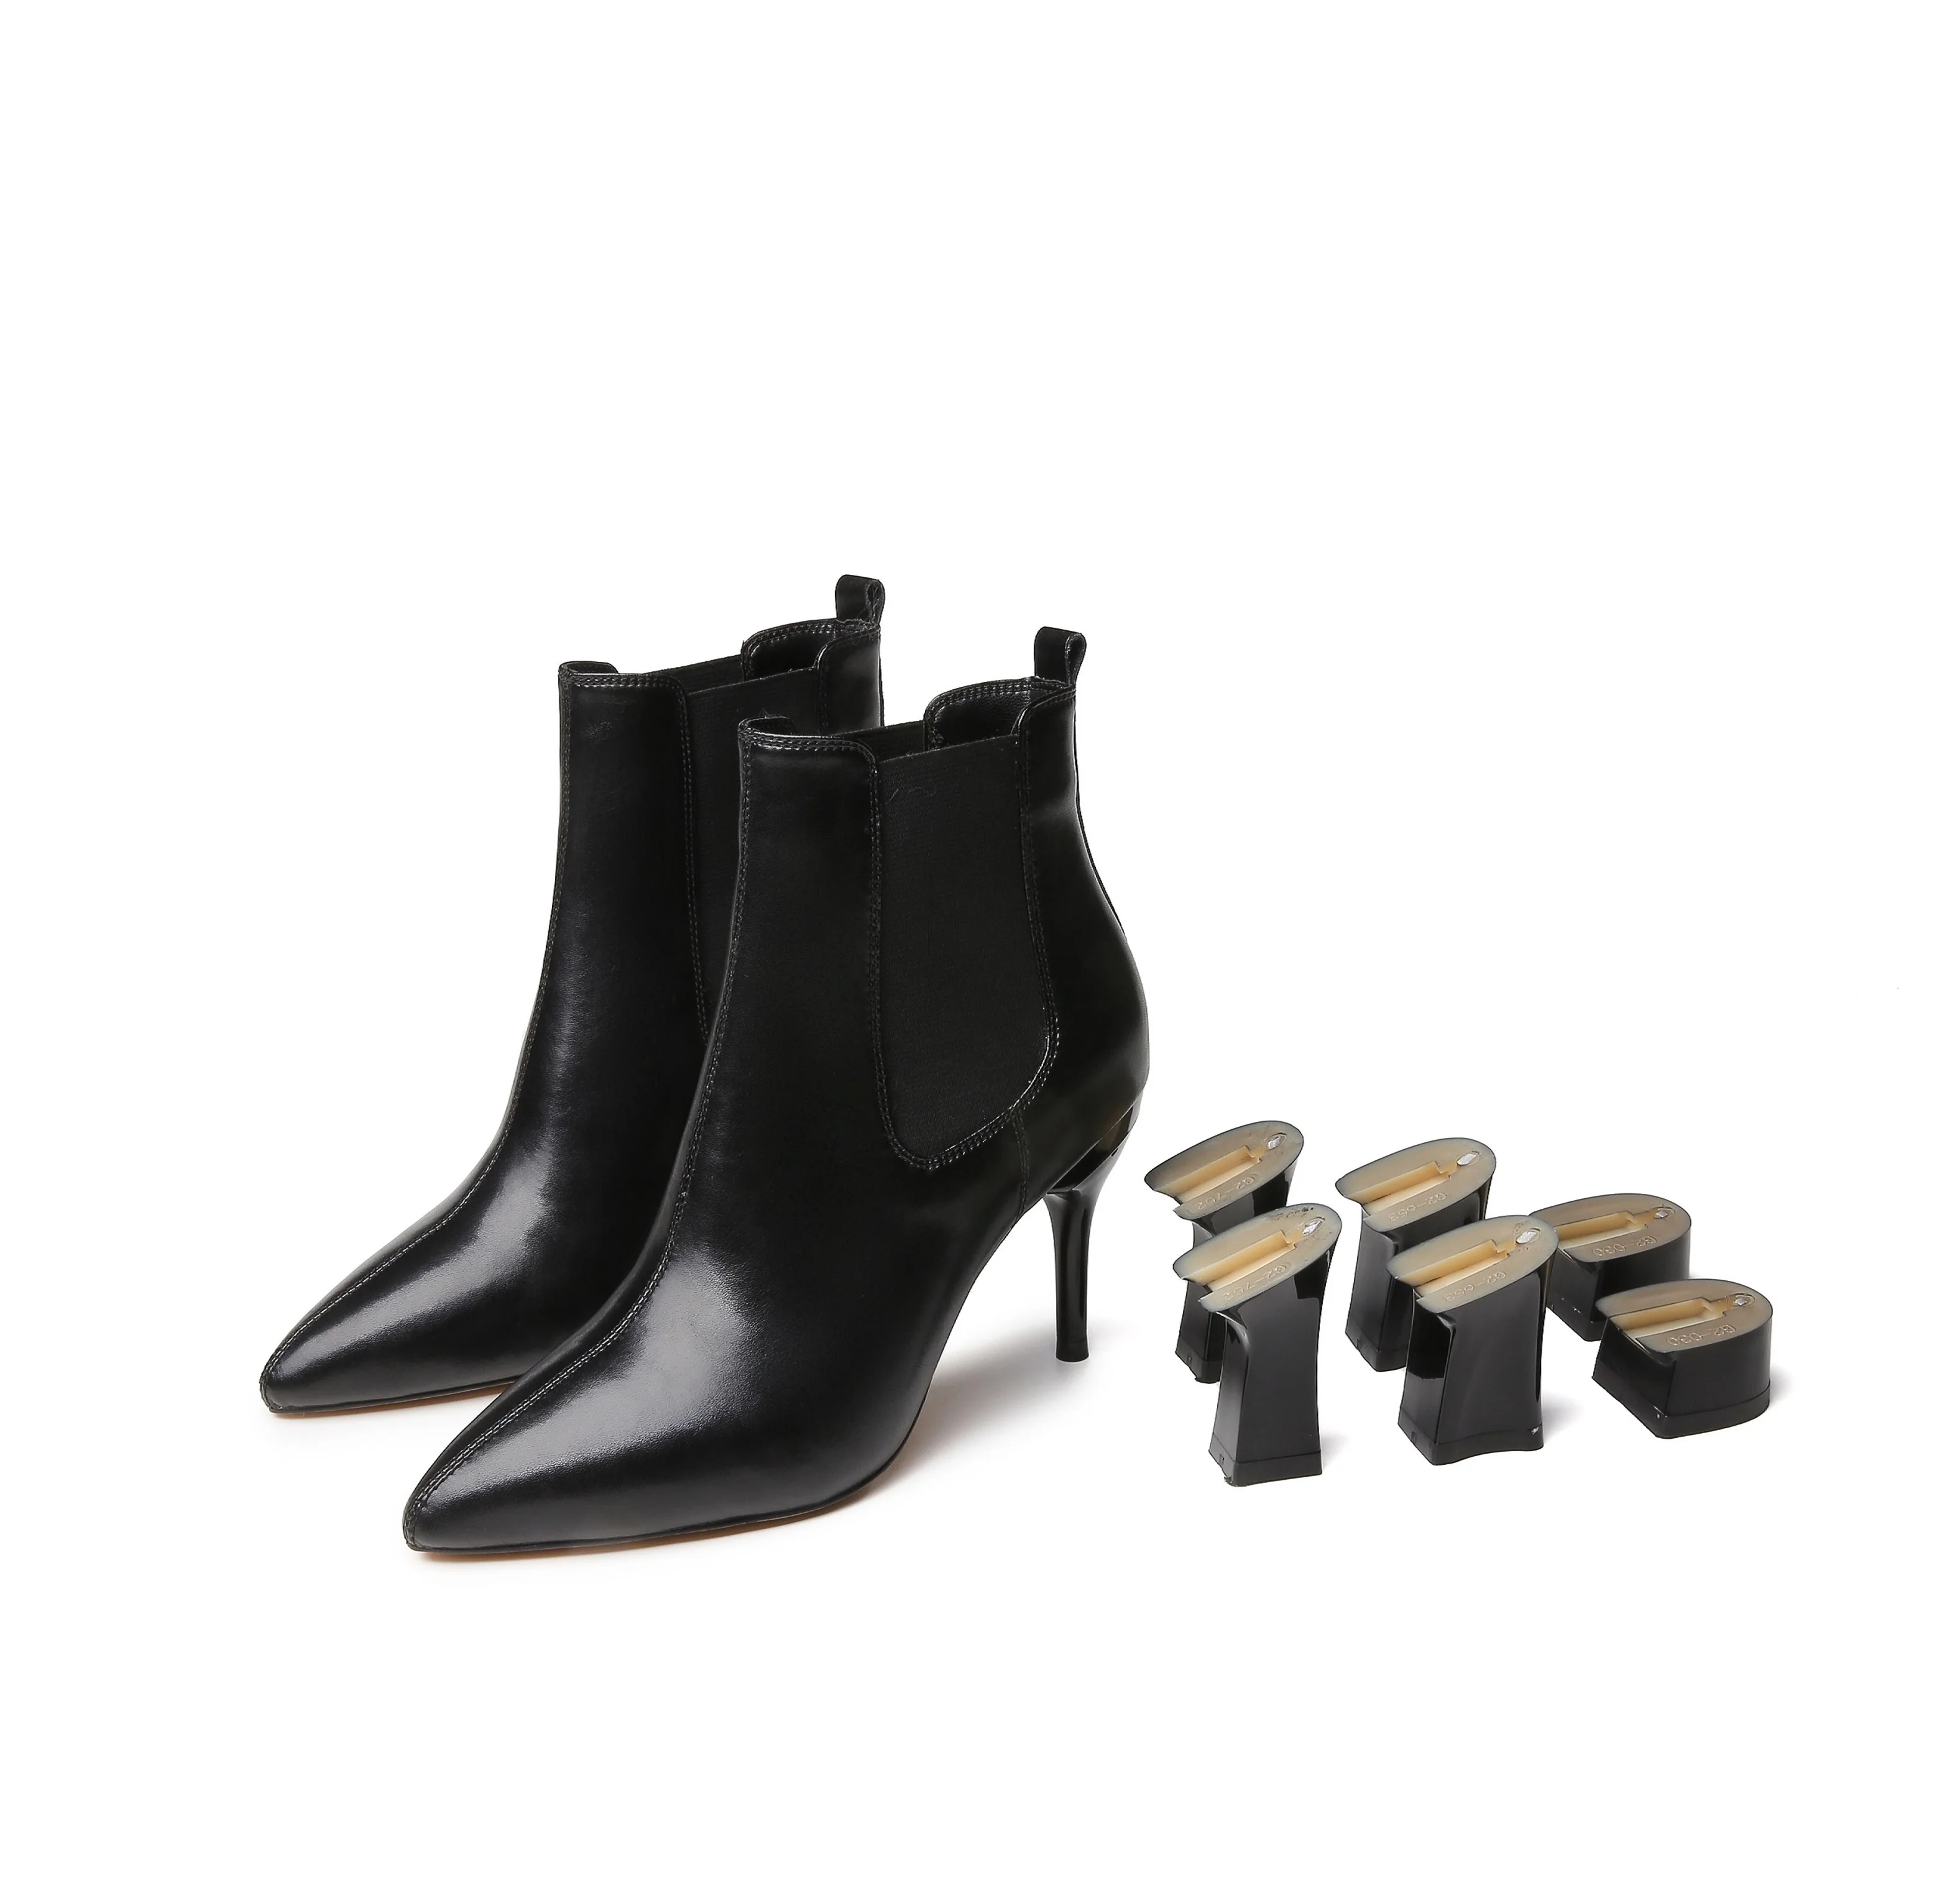 The newest black boots for women's fashion in 2021 are convertible heels change boots